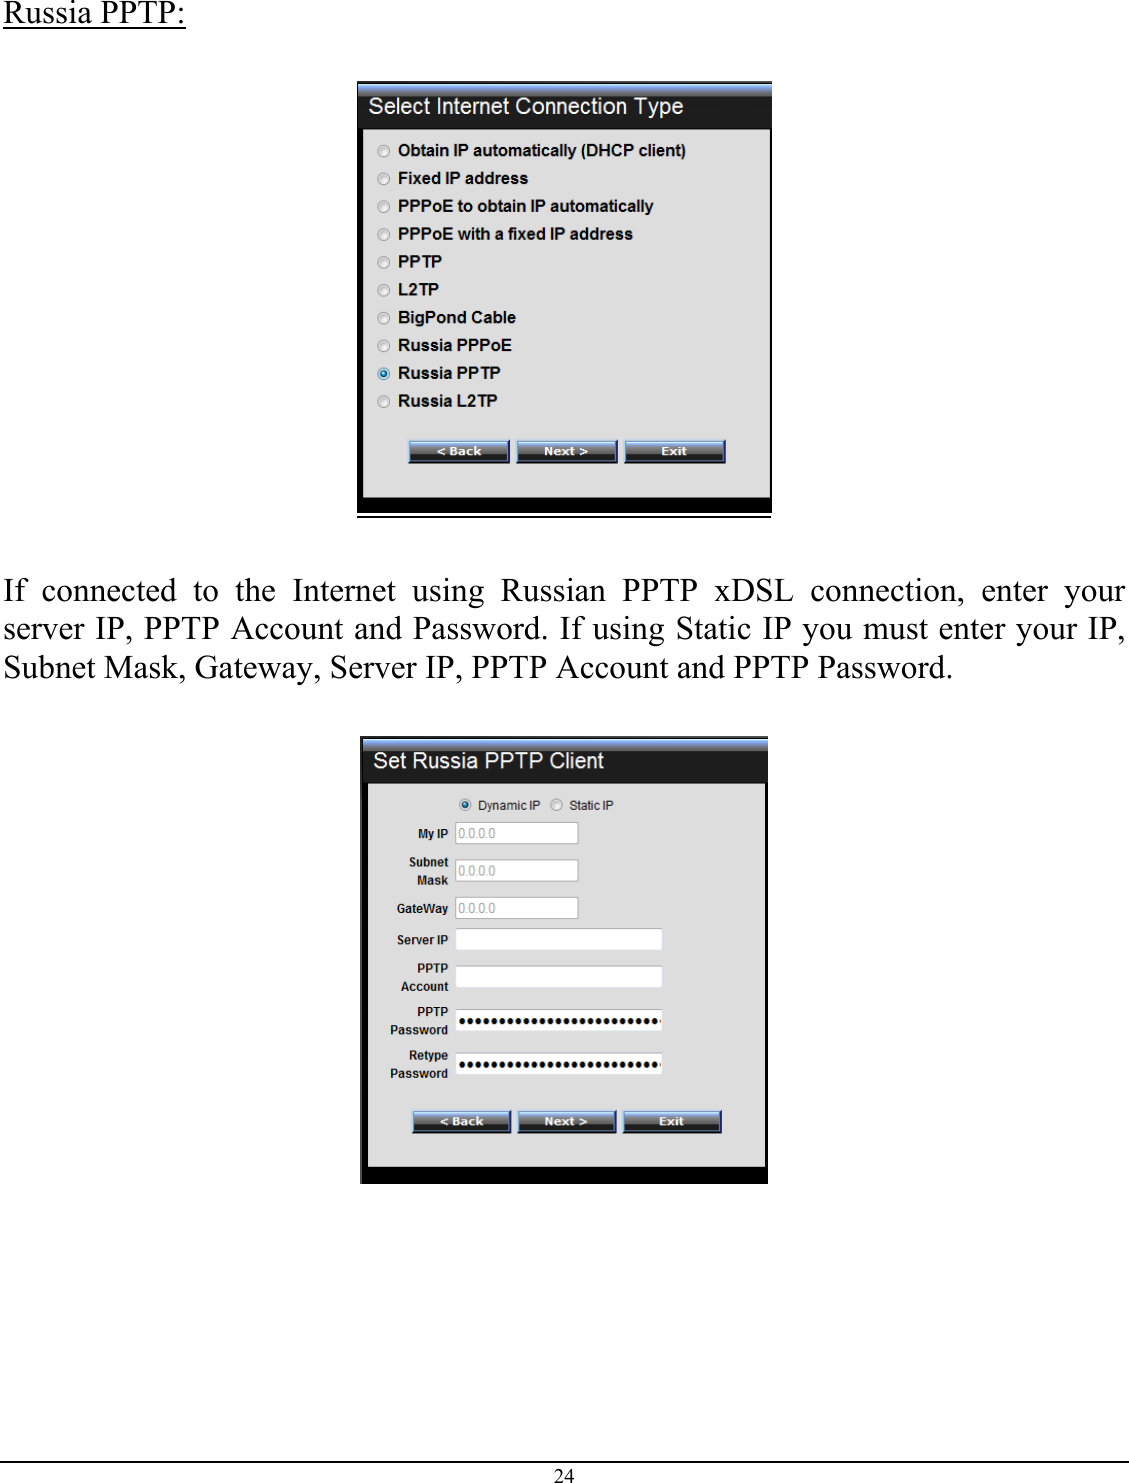 24   Russia PPTP:    If connected to the Internet using Russian PPTP xDSL connection, enter your server IP, PPTP Account and Password. If using Static IP you must enter your IP, Subnet Mask, Gateway, Server IP, PPTP Account and PPTP Password.          